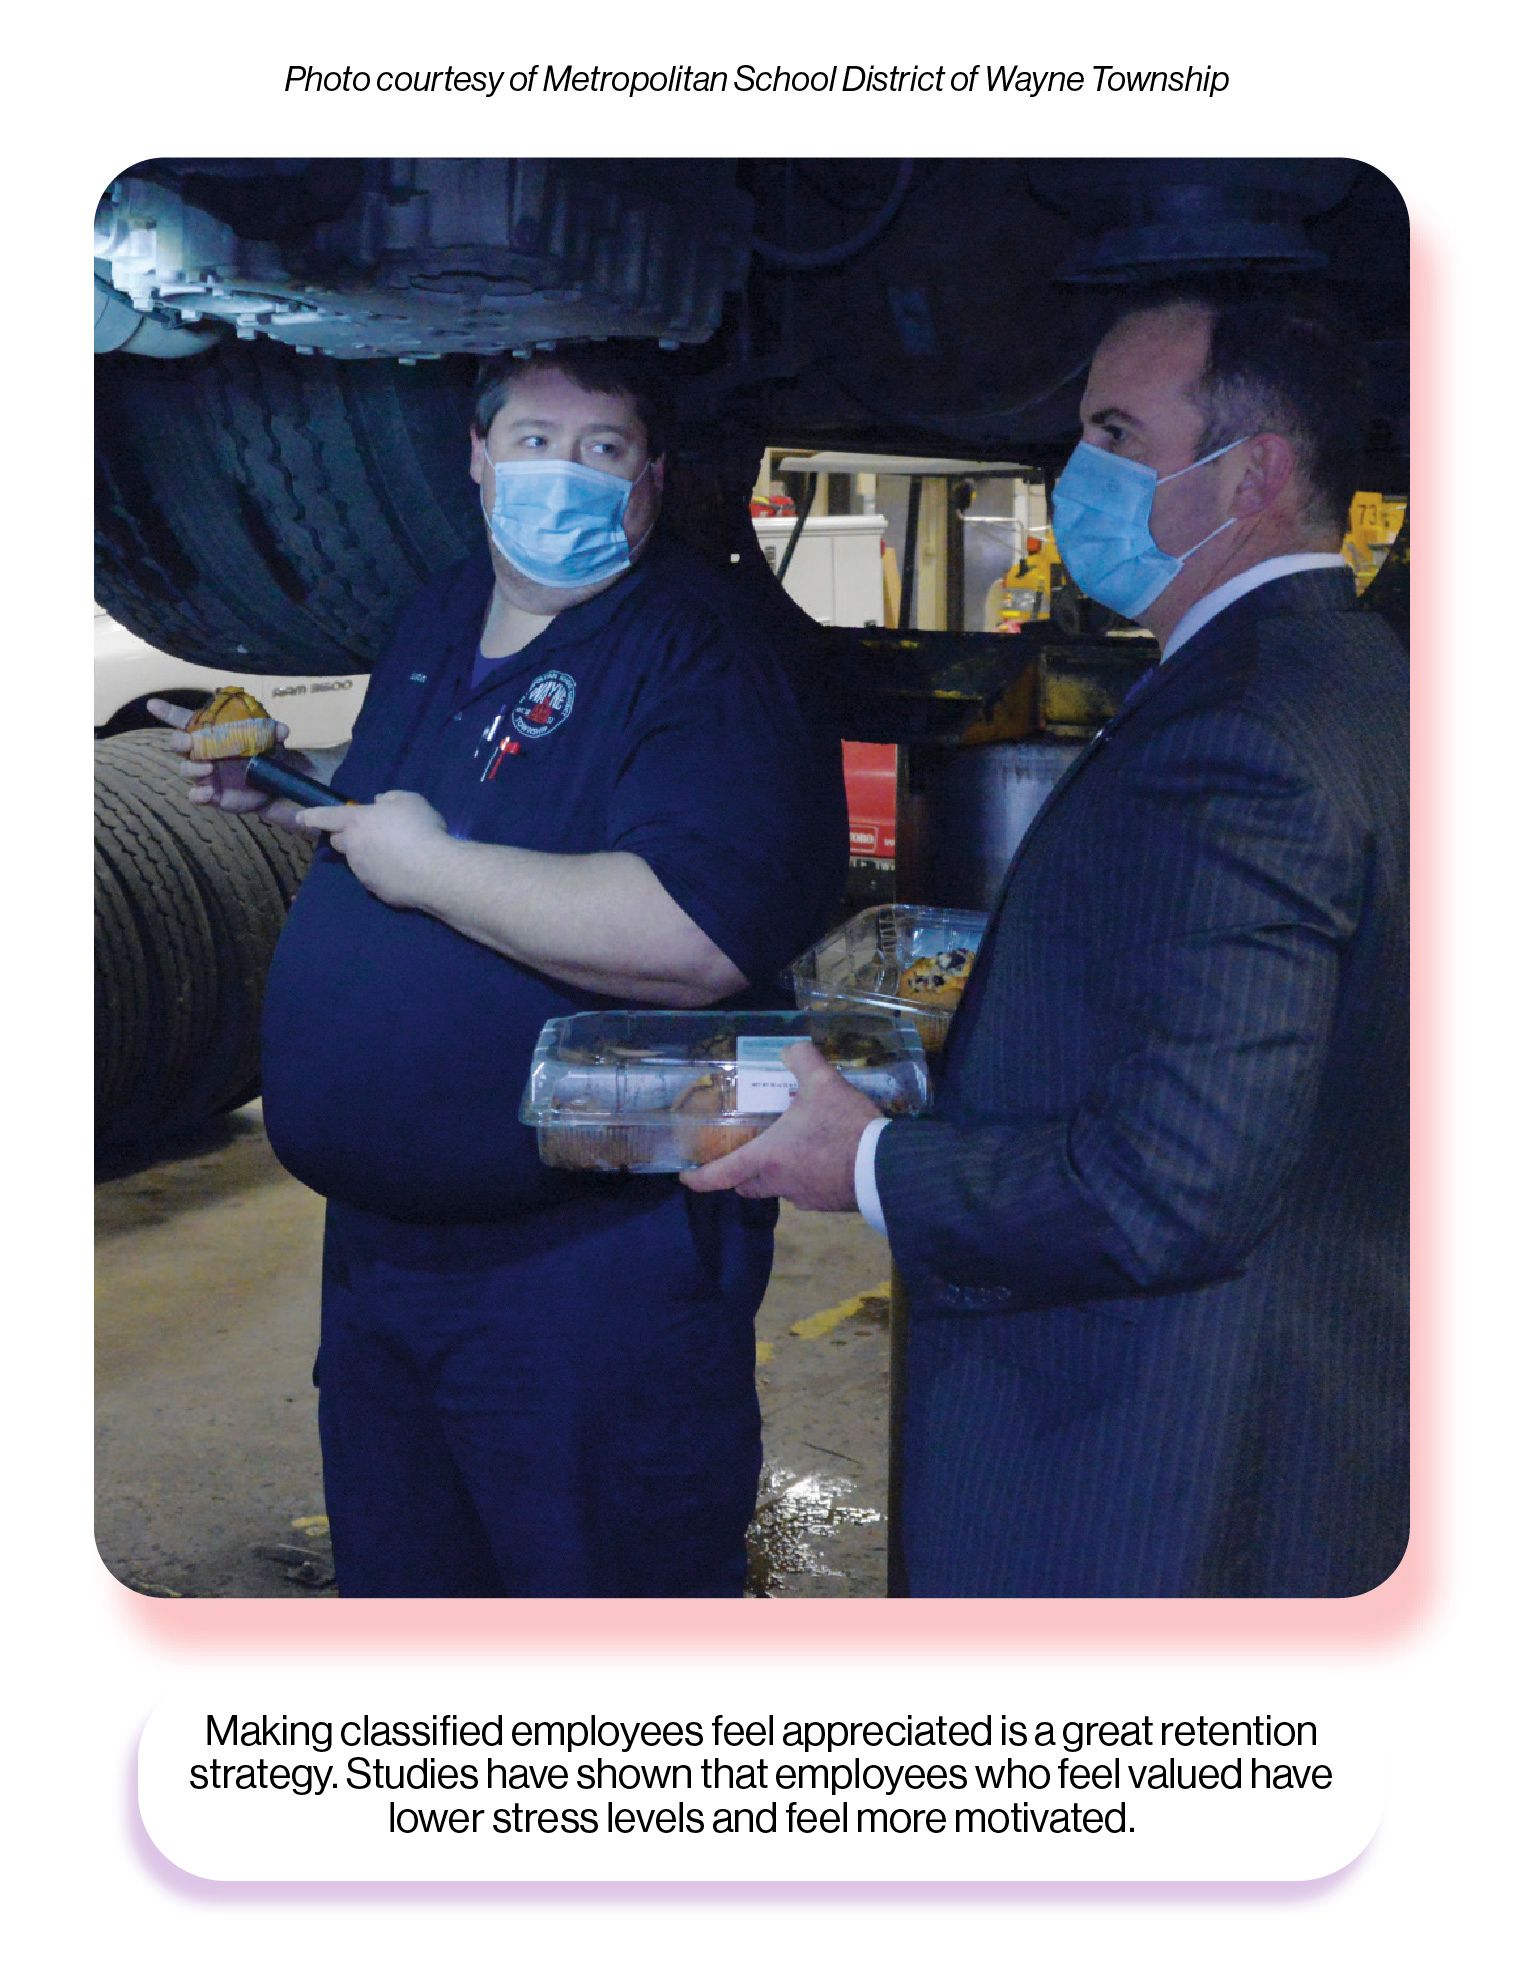 Image: Dr. Butts sharing muffins with district automotive staff, with the SchoolCEO caption 'Making classified employees feel appreciated is a great retention strategy. Studies have shown that employees who feel valued have lower stress levels and feel more motivated.'